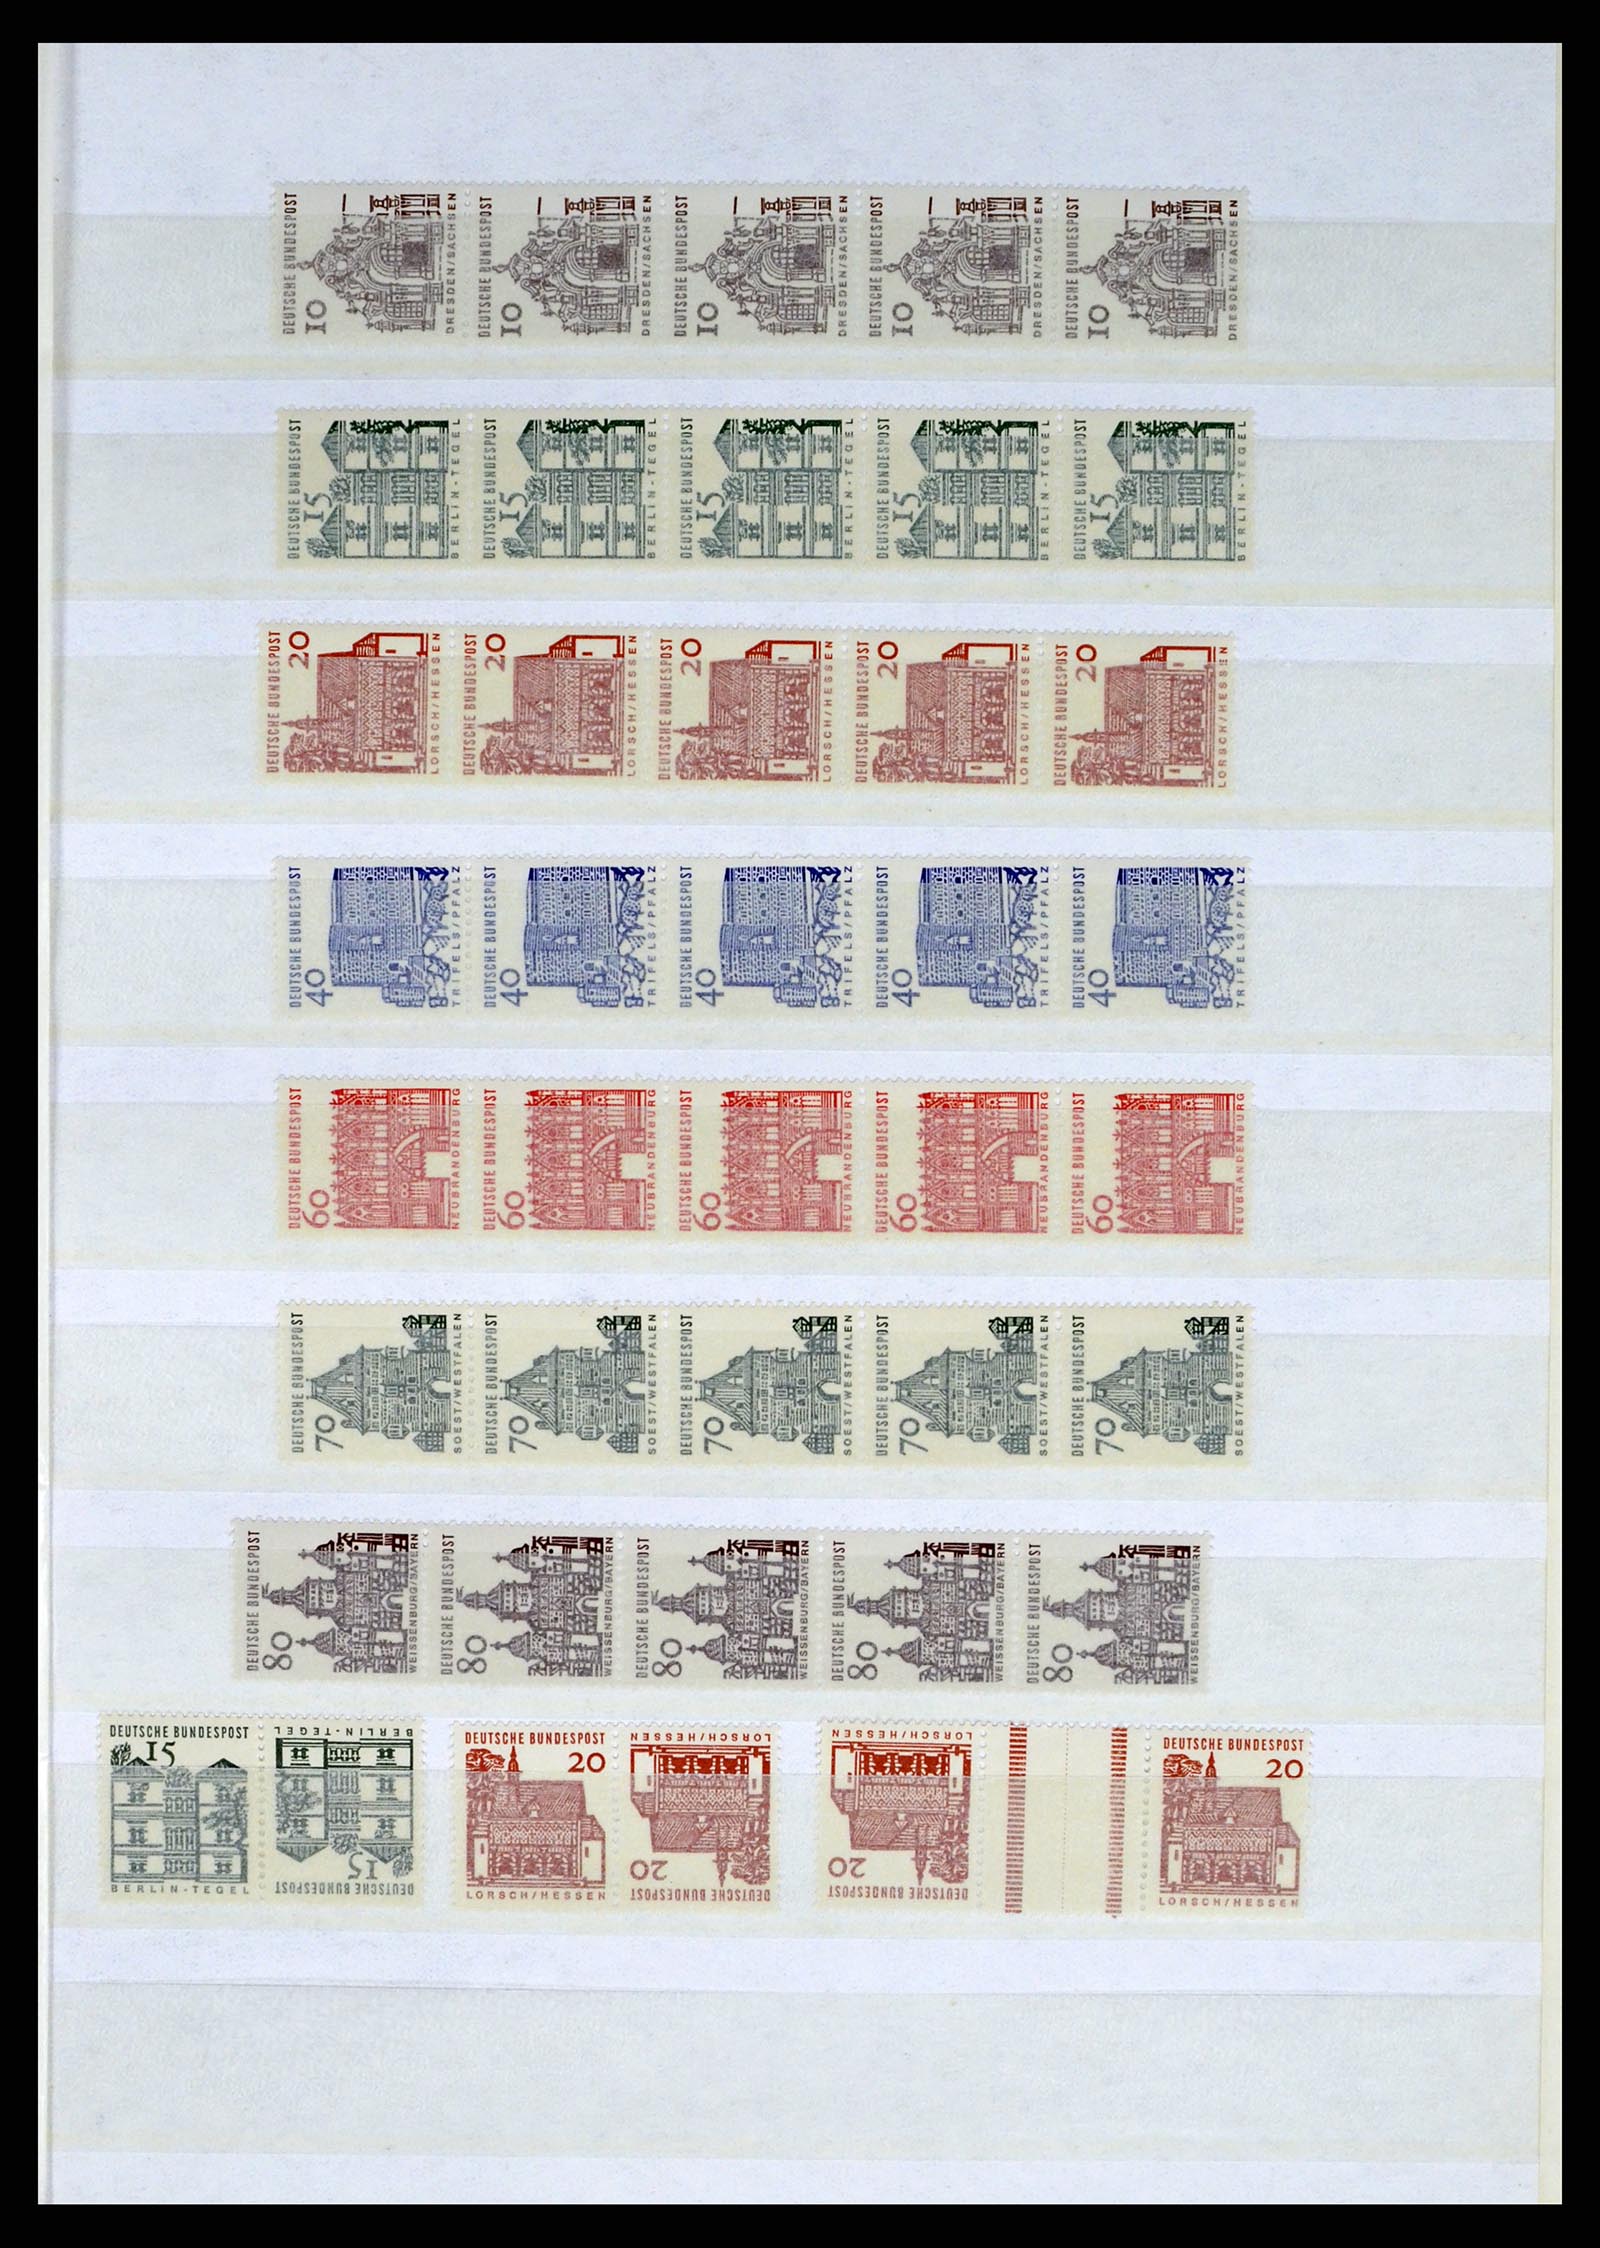 37354 055 - Stamp collection 37354 Bundespost and Berlin 1955-2000.